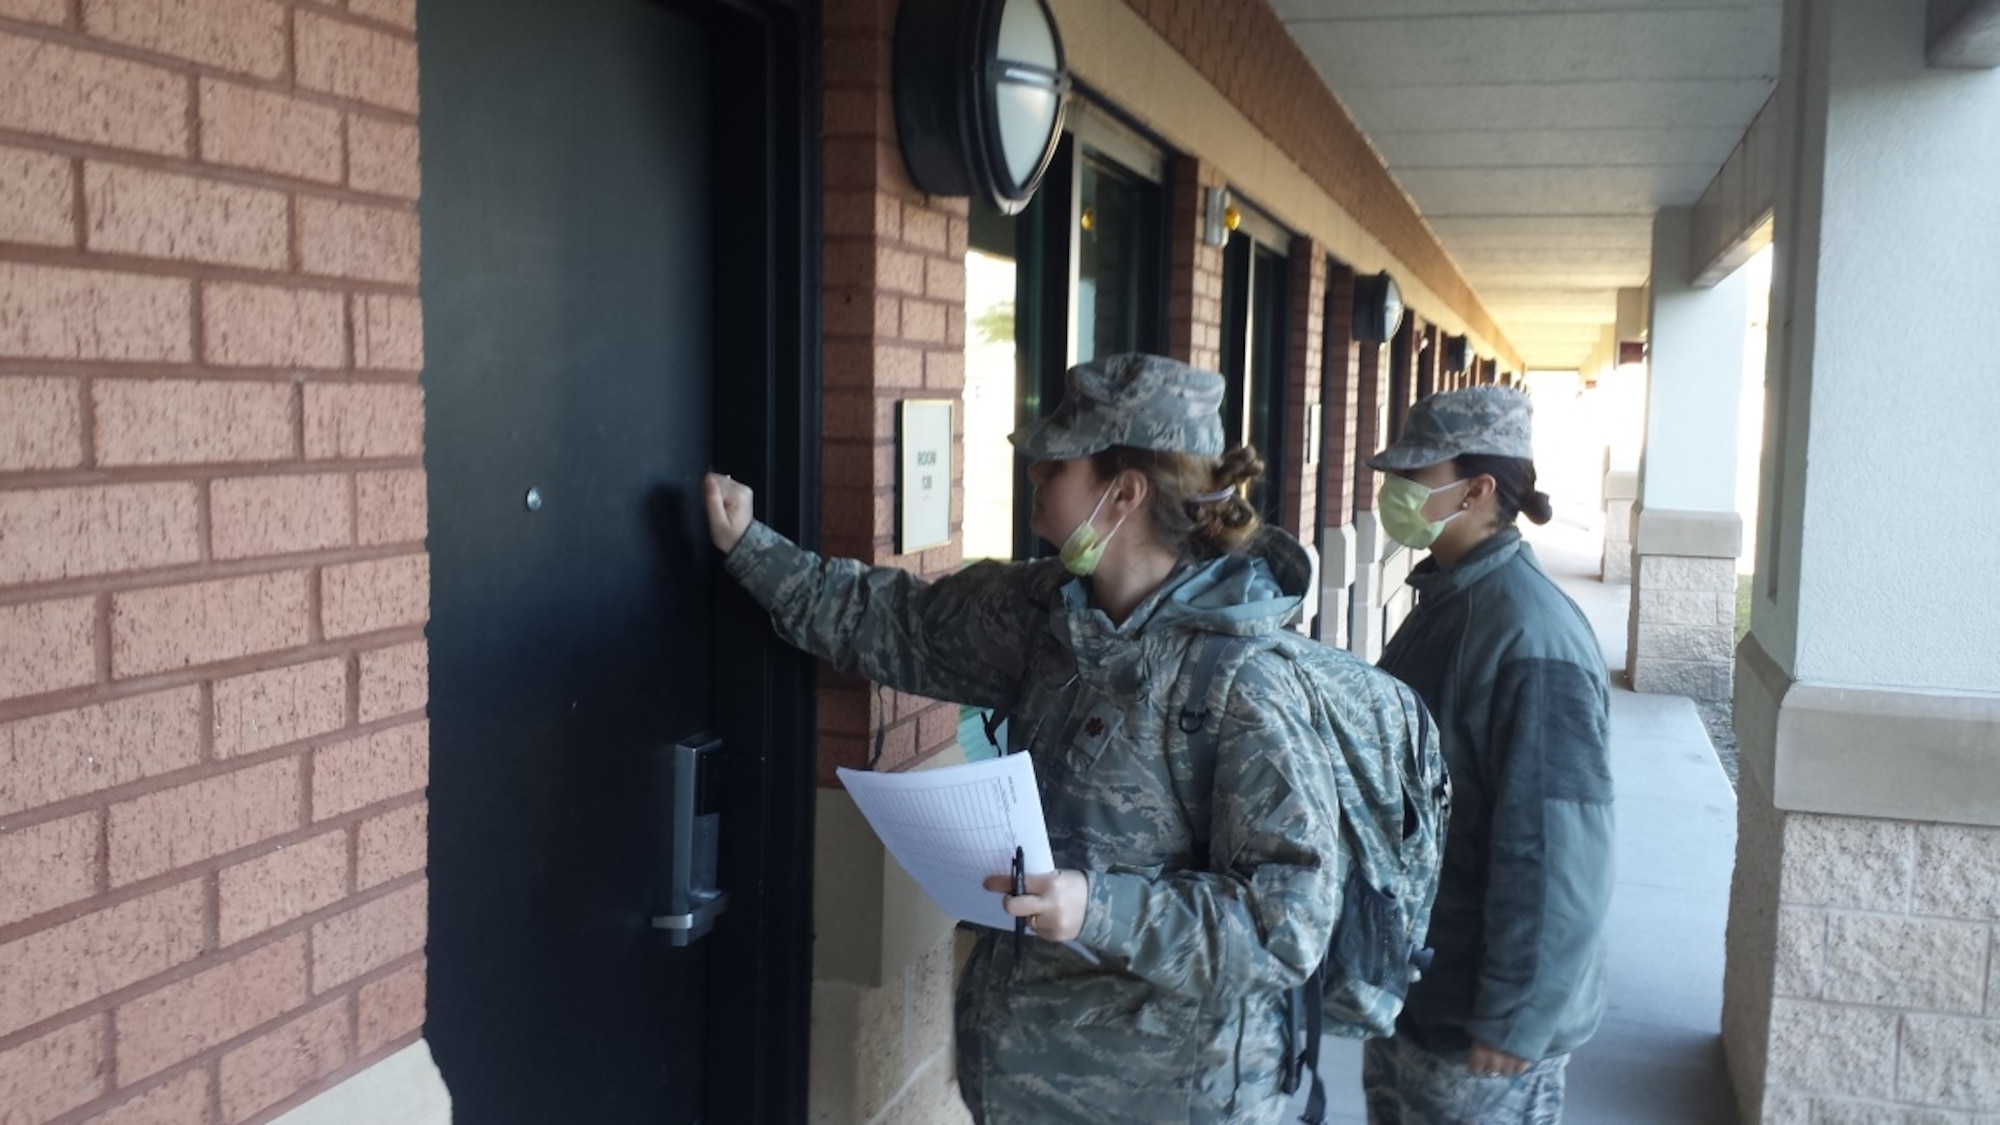 Maj. Leah Ward and Airman First Class Marissa Ruiz, both assigned to the 103rd Medical Group, conduct door-to-door house calls for all Airmen who were confined to quarters during a public health exercise at the Combat Readiness Training Center, Savannah, Ga., Jan. 7, 2015. (U.S. Air National Guard Photo by Maj. Bryon M. Turner)